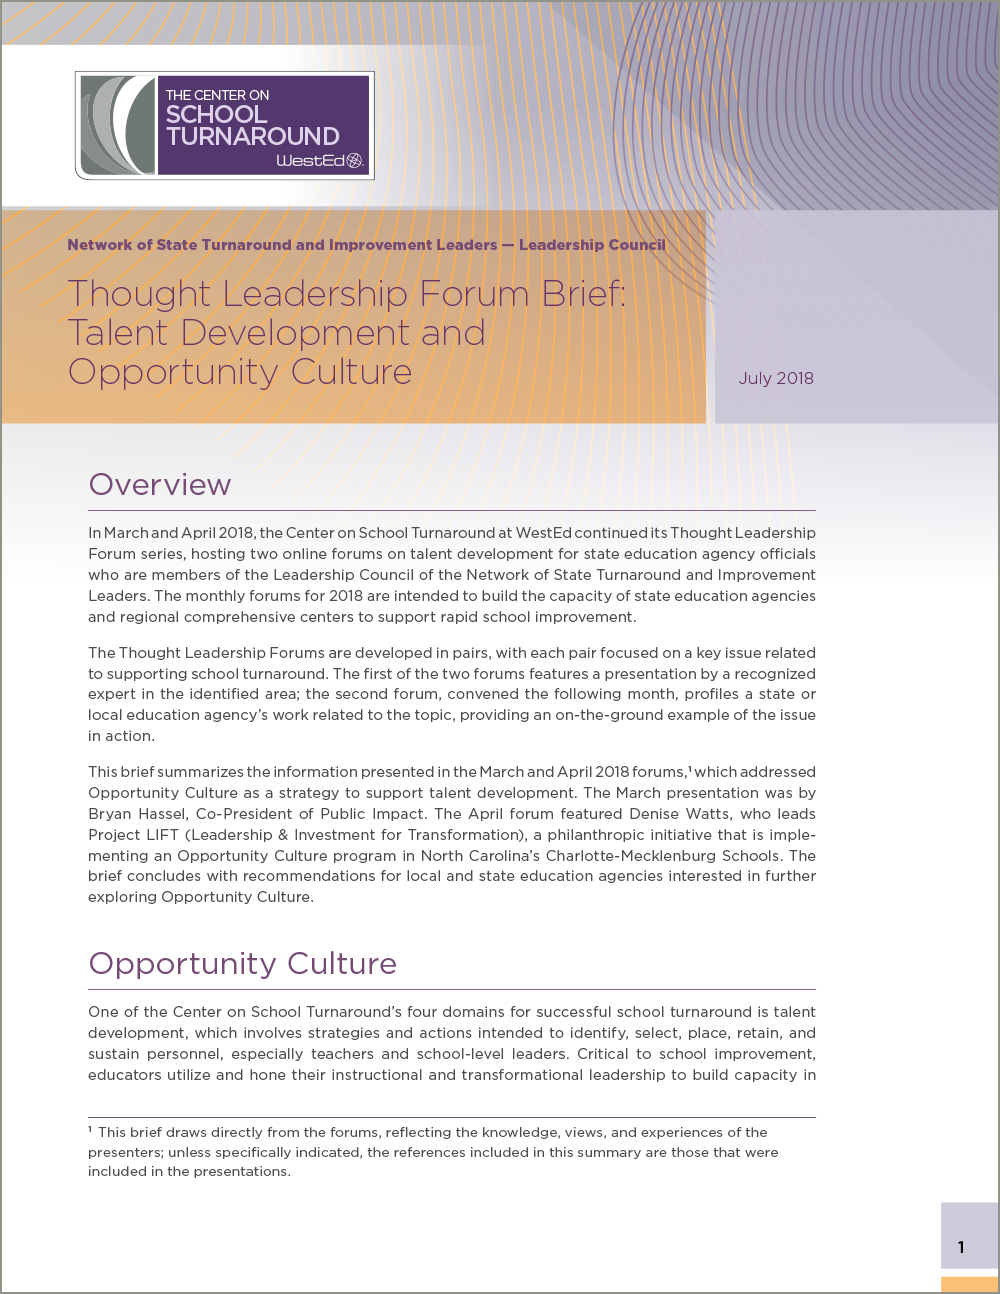 Thought Leadership Forum Brief: Talent Development and Opportunity Culture